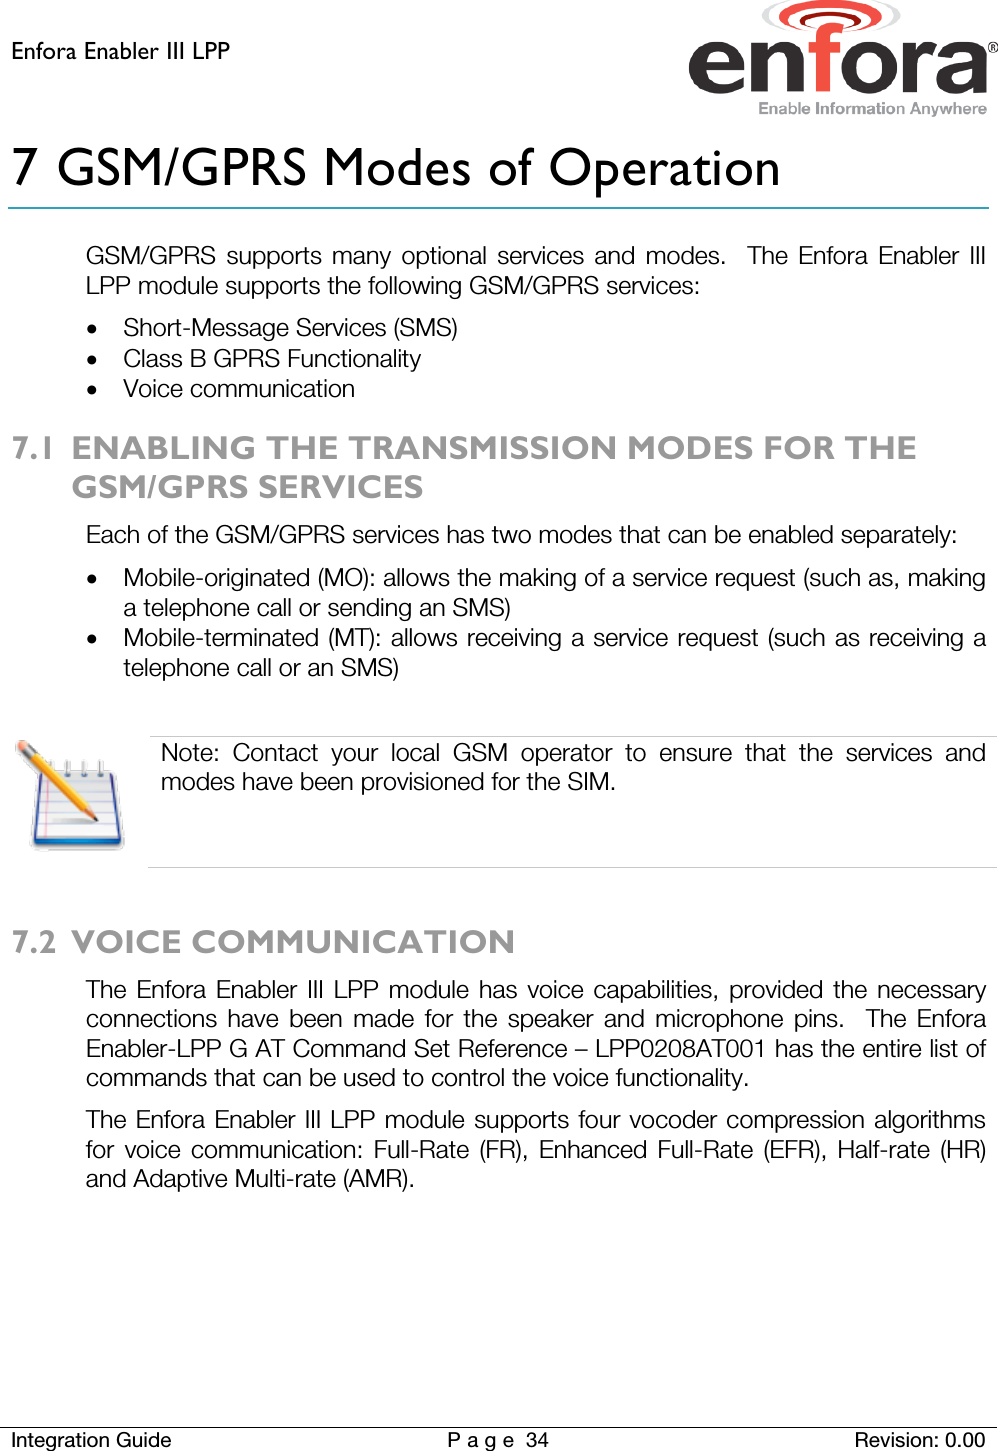 Enfora Enabler III LPP    Integration Guide Page 34 Revision: 0.00  7 GSM/GPRS Modes of Operation GSM/GPRS supports many optional services and modes.  The Enfora Enabler III LPP module supports the following GSM/GPRS services: • Short-Message Services (SMS) • Class B GPRS Functionality • Voice communication 7.1 ENABLING THE TRANSMISSION MODES FOR THE GSM/GPRS SERVICES Each of the GSM/GPRS services has two modes that can be enabled separately: • Mobile-originated (MO): allows the making of a service request (such as, making a telephone call or sending an SMS) • Mobile-terminated (MT): allows receiving a service request (such as receiving a telephone call or an SMS)   Note: Contact your local GSM operator to ensure that the services and modes have been provisioned for the SIM.  7.2 VOICE COMMUNICATION The Enfora Enabler III LPP module has voice capabilities, provided the necessary connections have been made for the speaker and microphone pins.  The Enfora Enabler-LPP G AT Command Set Reference – LPP0208AT001 has the entire list of commands that can be used to control the voice functionality.  The Enfora Enabler III LPP module supports four vocoder compression algorithms for voice communication: Full-Rate (FR), Enhanced Full-Rate (EFR), Half-rate (HR) and Adaptive Multi-rate (AMR).   